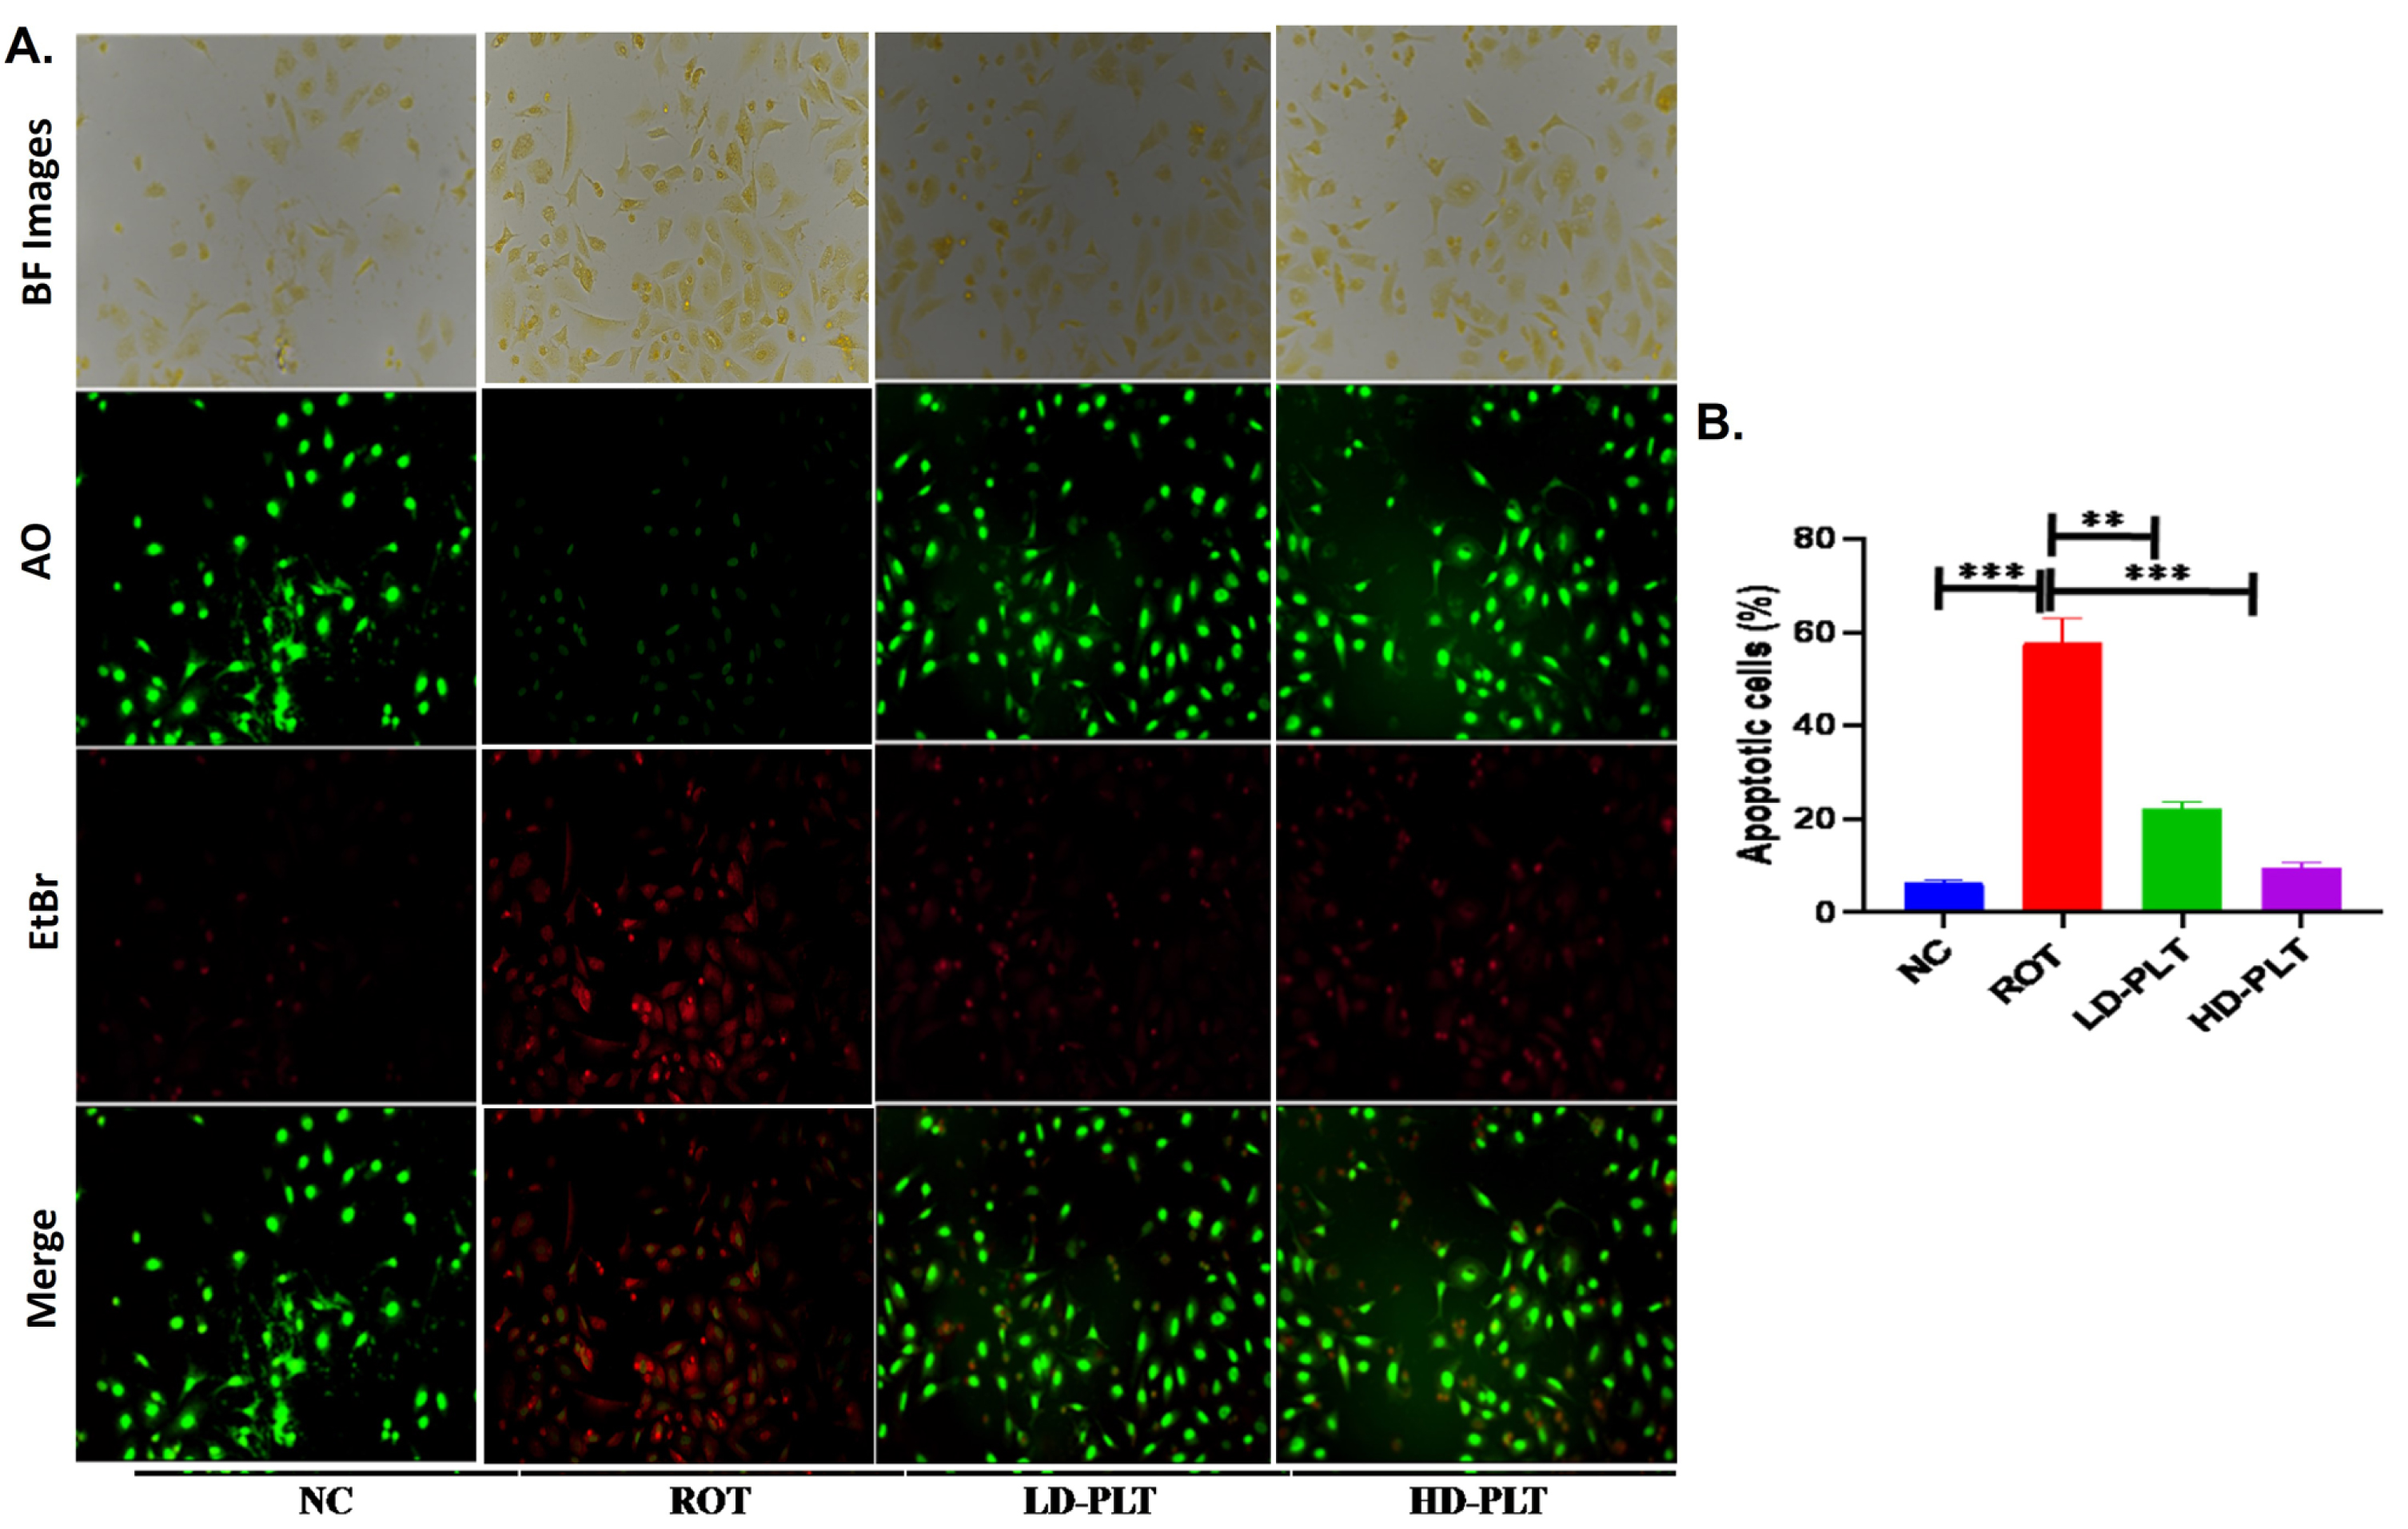 Cell apoptosis quantified using AO/EtBr staining. A) AO/EtBr staining of cells. B) Quantification of apoptotic cells no (***p < 0.001, **p < 0.01, and *p < 0.05). One-way ANOVA was applied to statistical analysis, followed by post hoc analysis by “Bonferroni’s multiple comparison tests”. The results obtained are represented as mean±SEM and p < 0.05 were considered statistically significant.